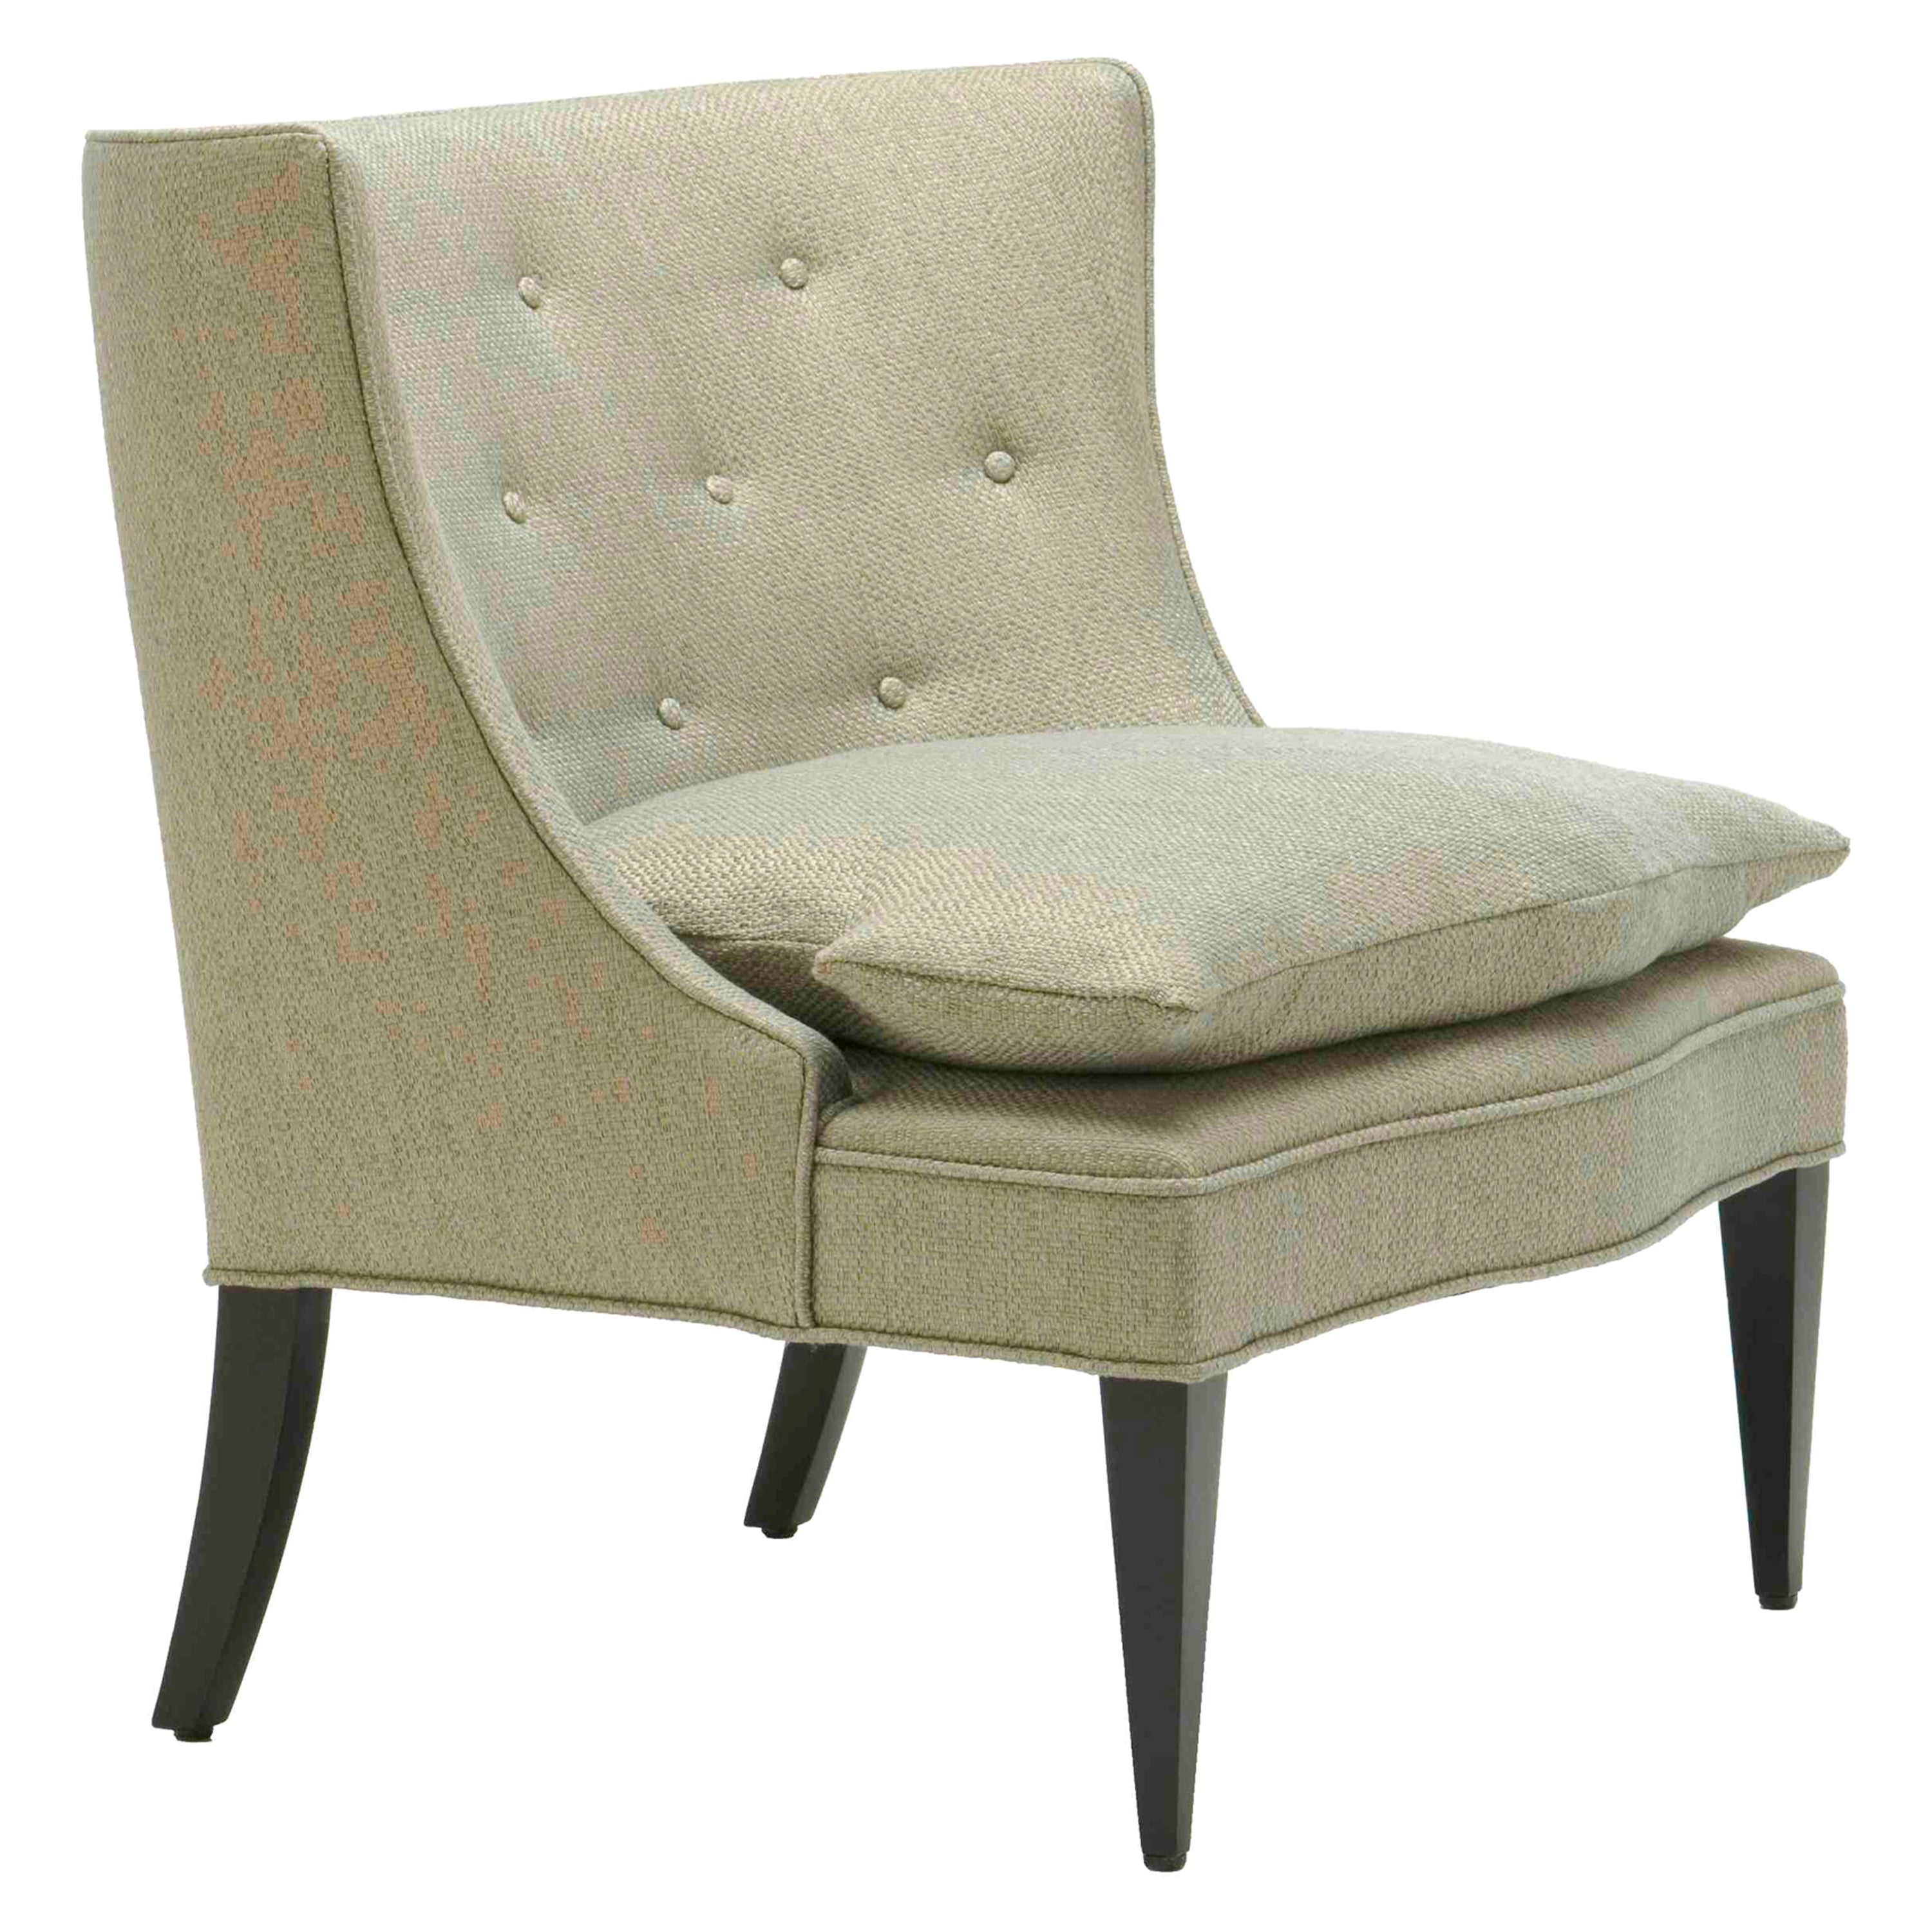 Slipper Upholstered Chair with Concave Tufted Back and Tapered Legs